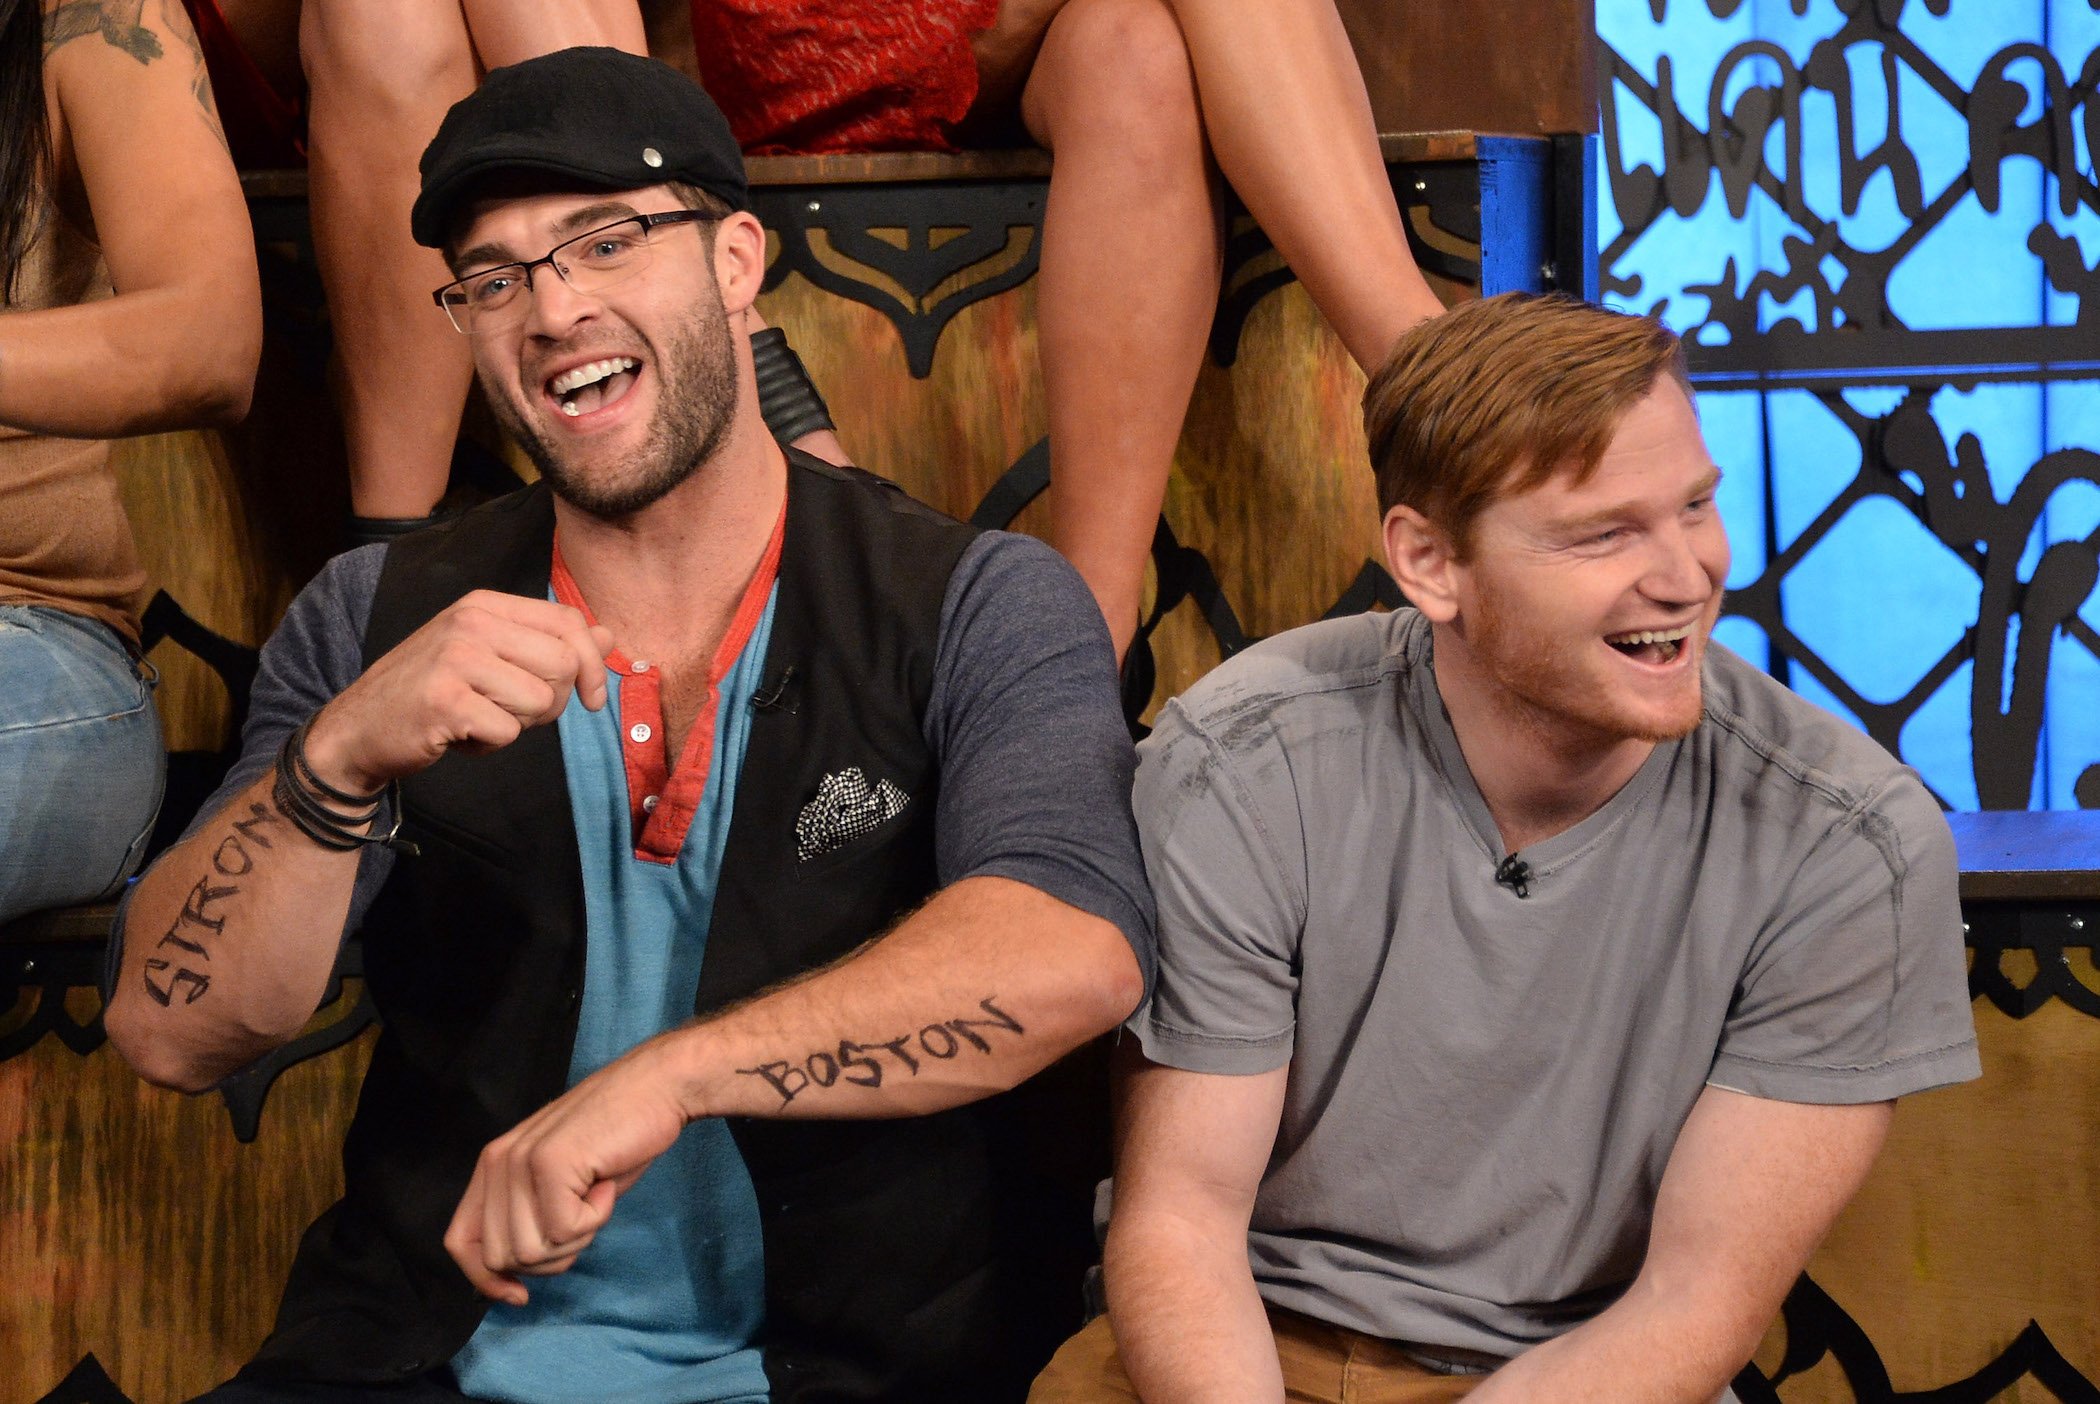 CT Tamburello, the winner of MTV's 'The Challenge' Season 37 final, and Wes Bergmann, laughing together on a stage